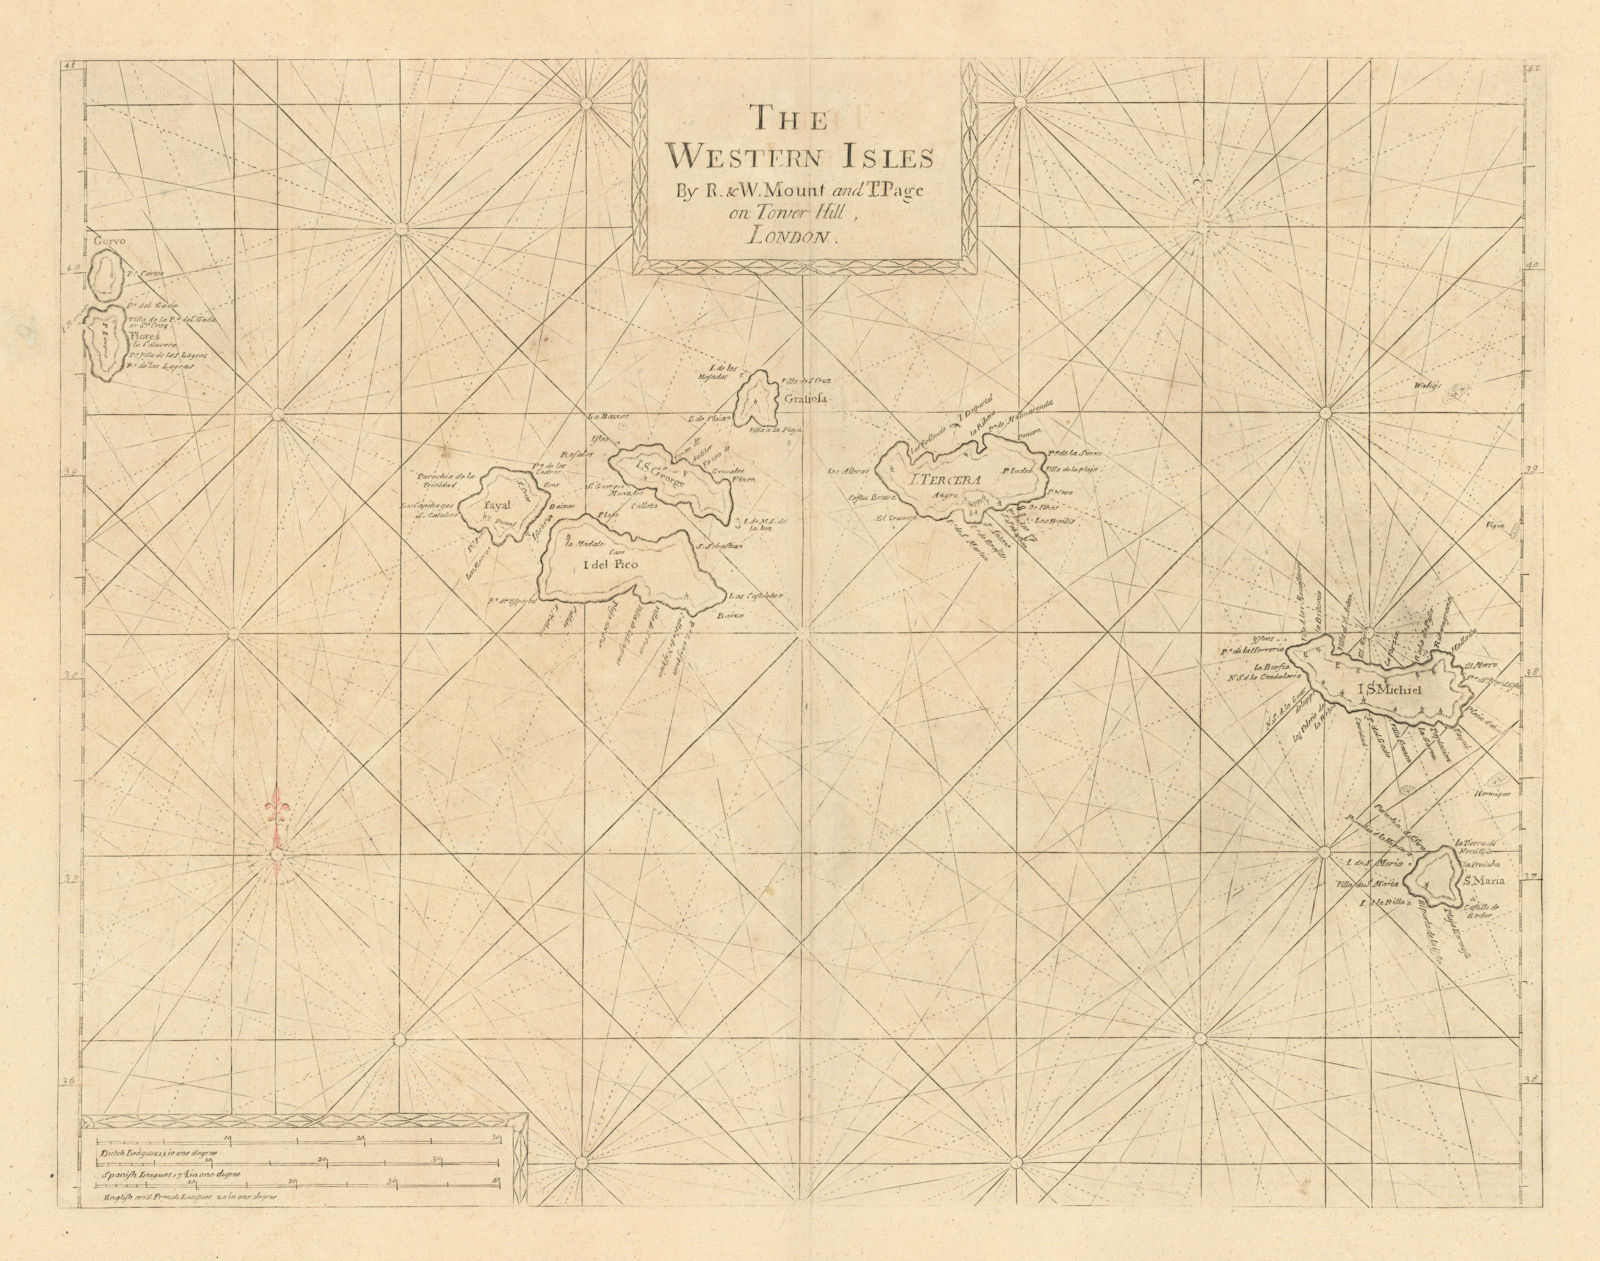 Associate Product The Western Isles. Antique sea chart of the Azores. MOUNT & PAGE 1758 old map